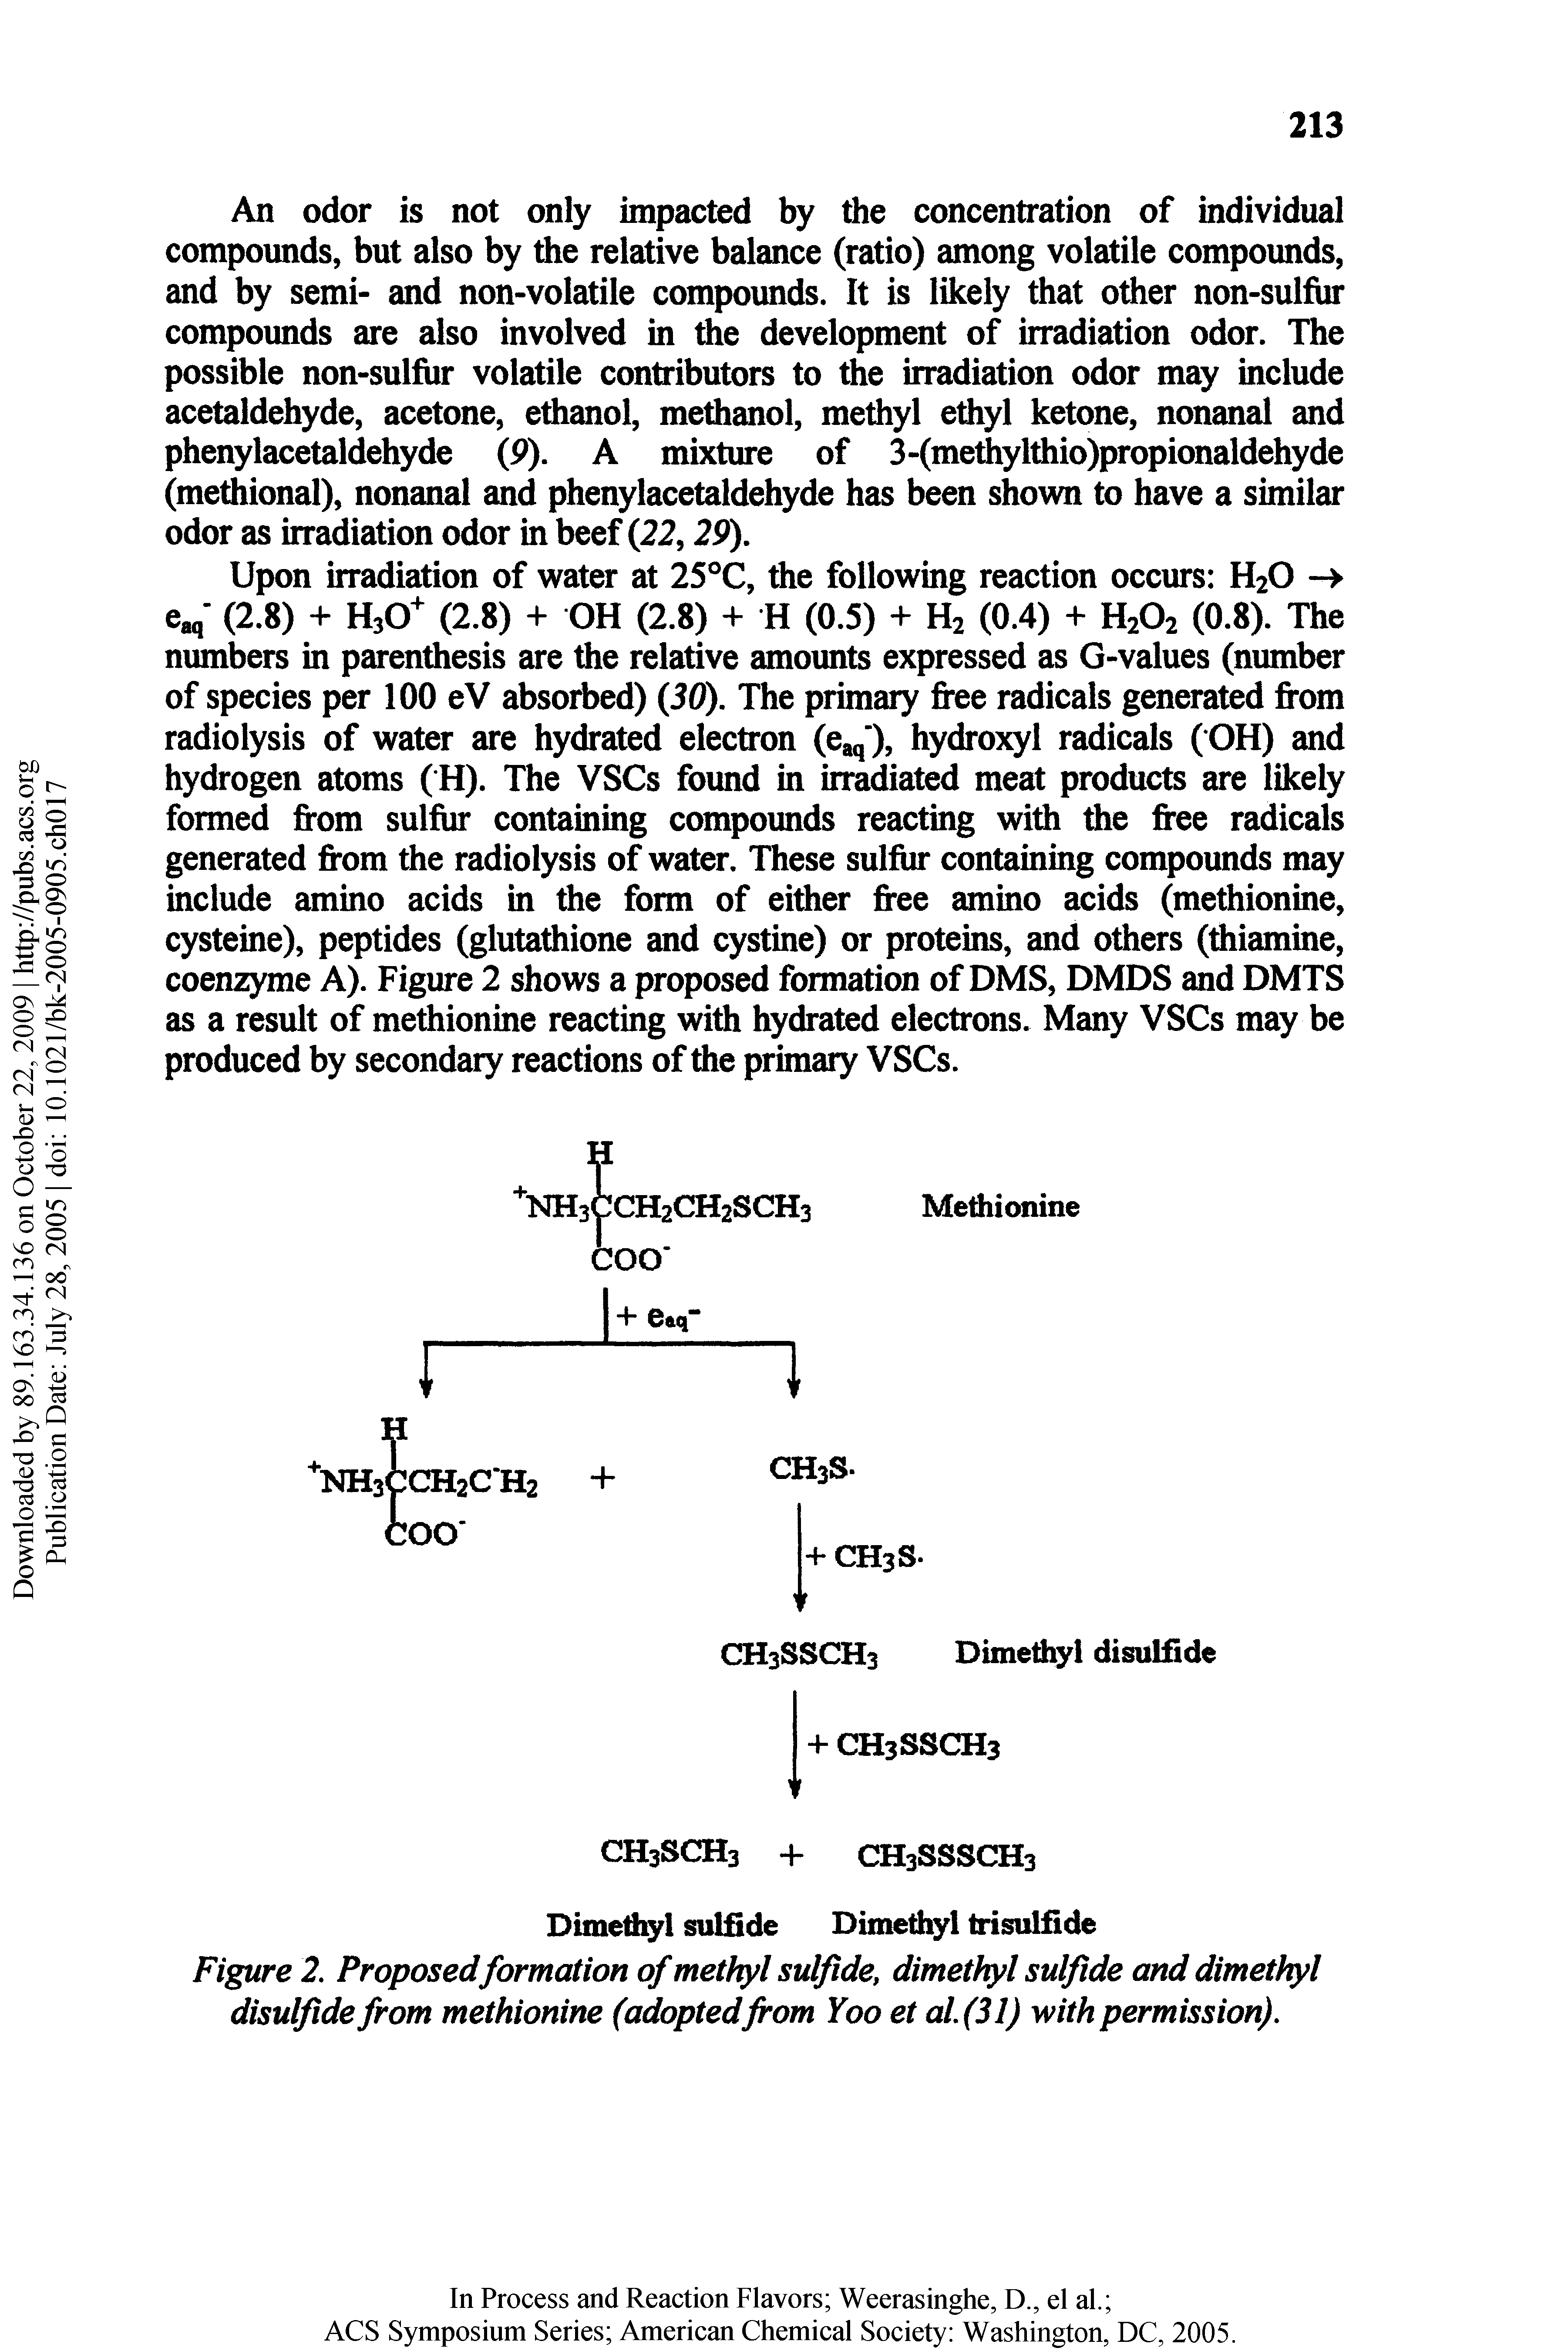 Figure 2. Proposedformation of methyl sulfide, dimethyl sulfide and dimethyl disulfide from methionine (adoptedfrom Yoo et al.(31) with permission).